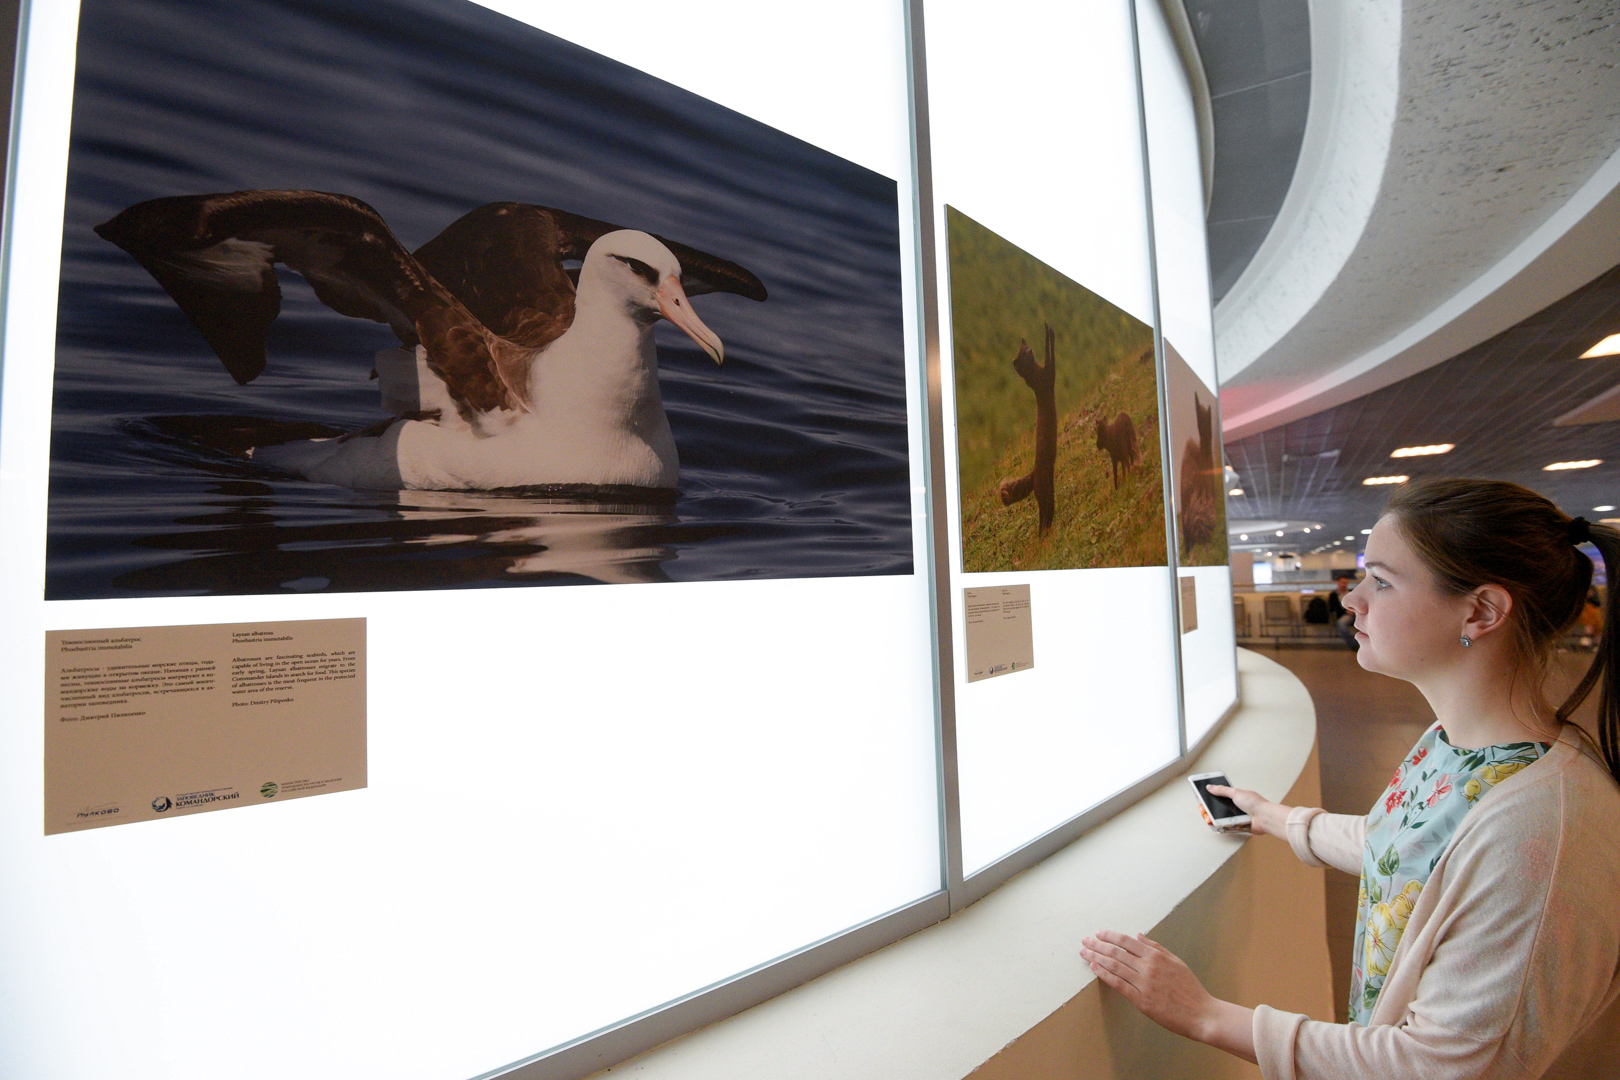 The Commander Islands Nature Reserve Photo Show in Pulkovo Extended